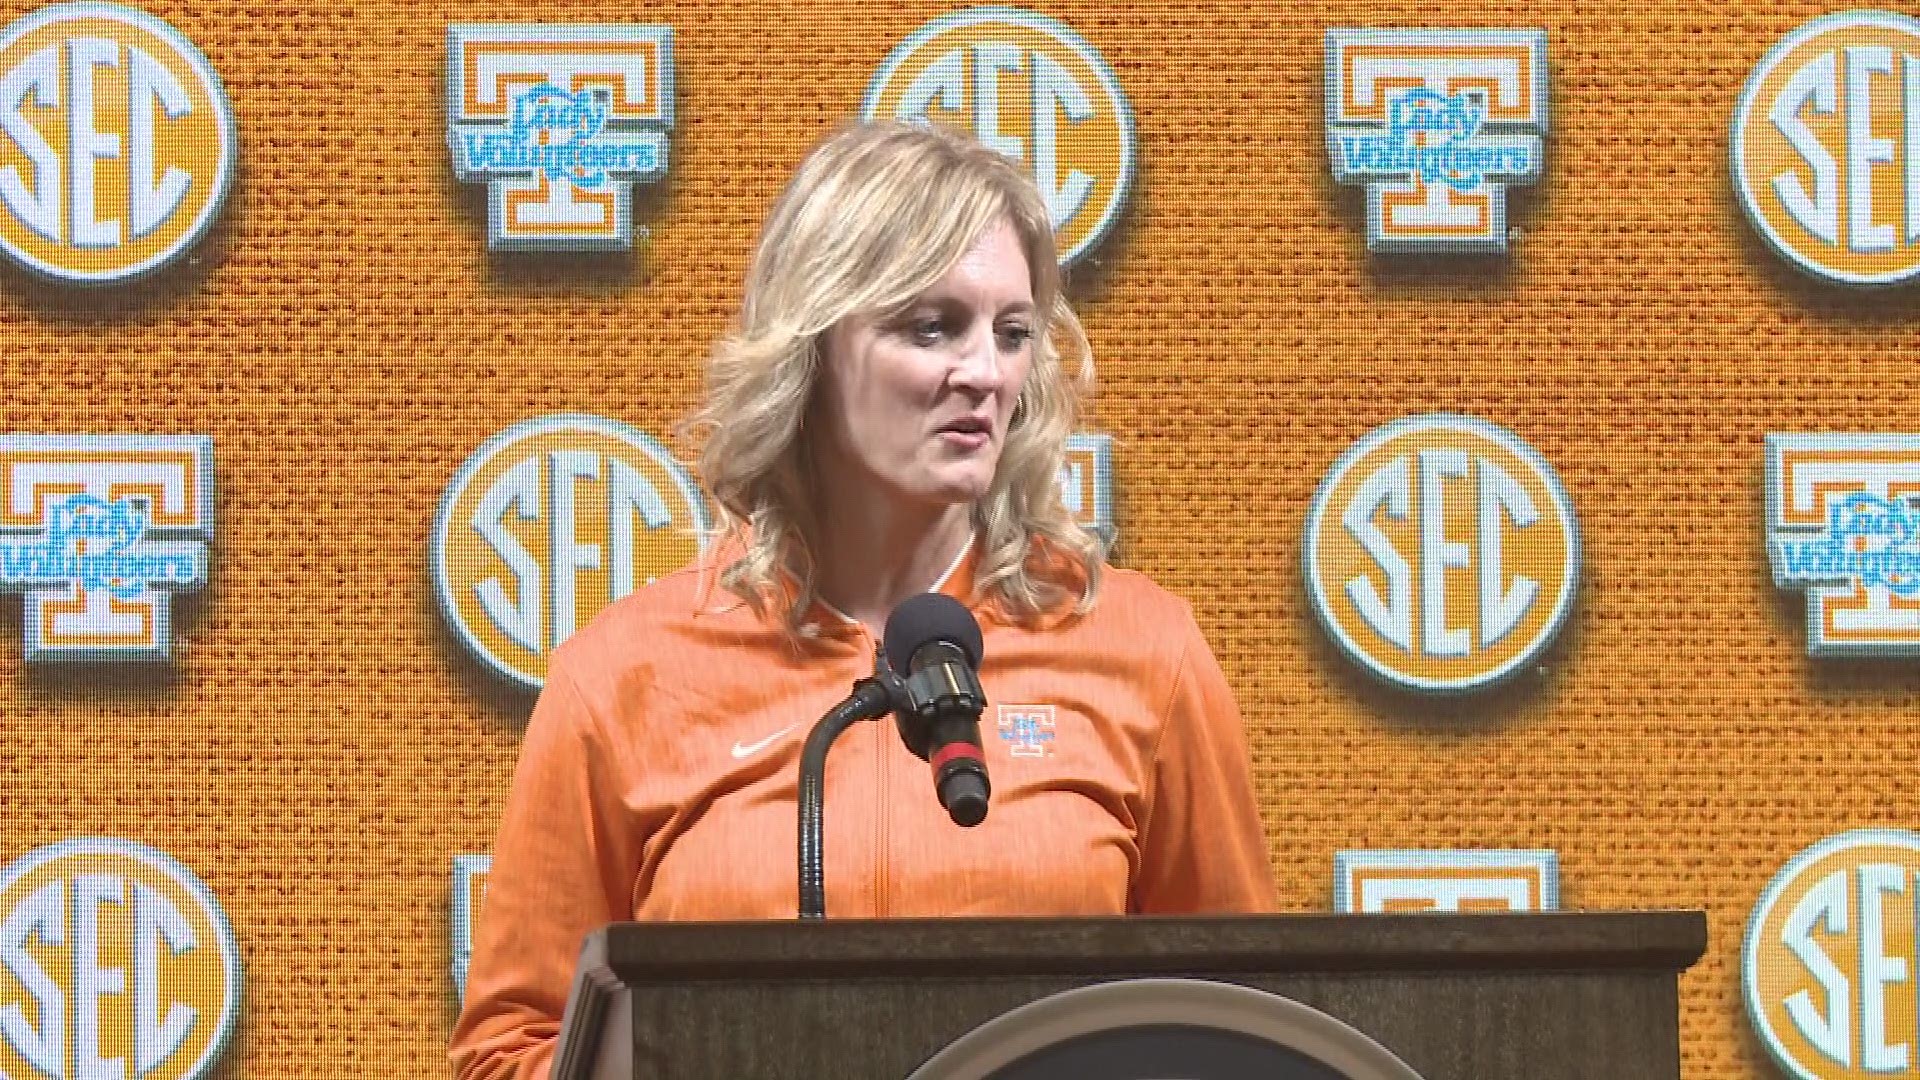 Head coach Kellie Harper spoke to the media about taking over the program that she used to play for and what she expects from her players this season.